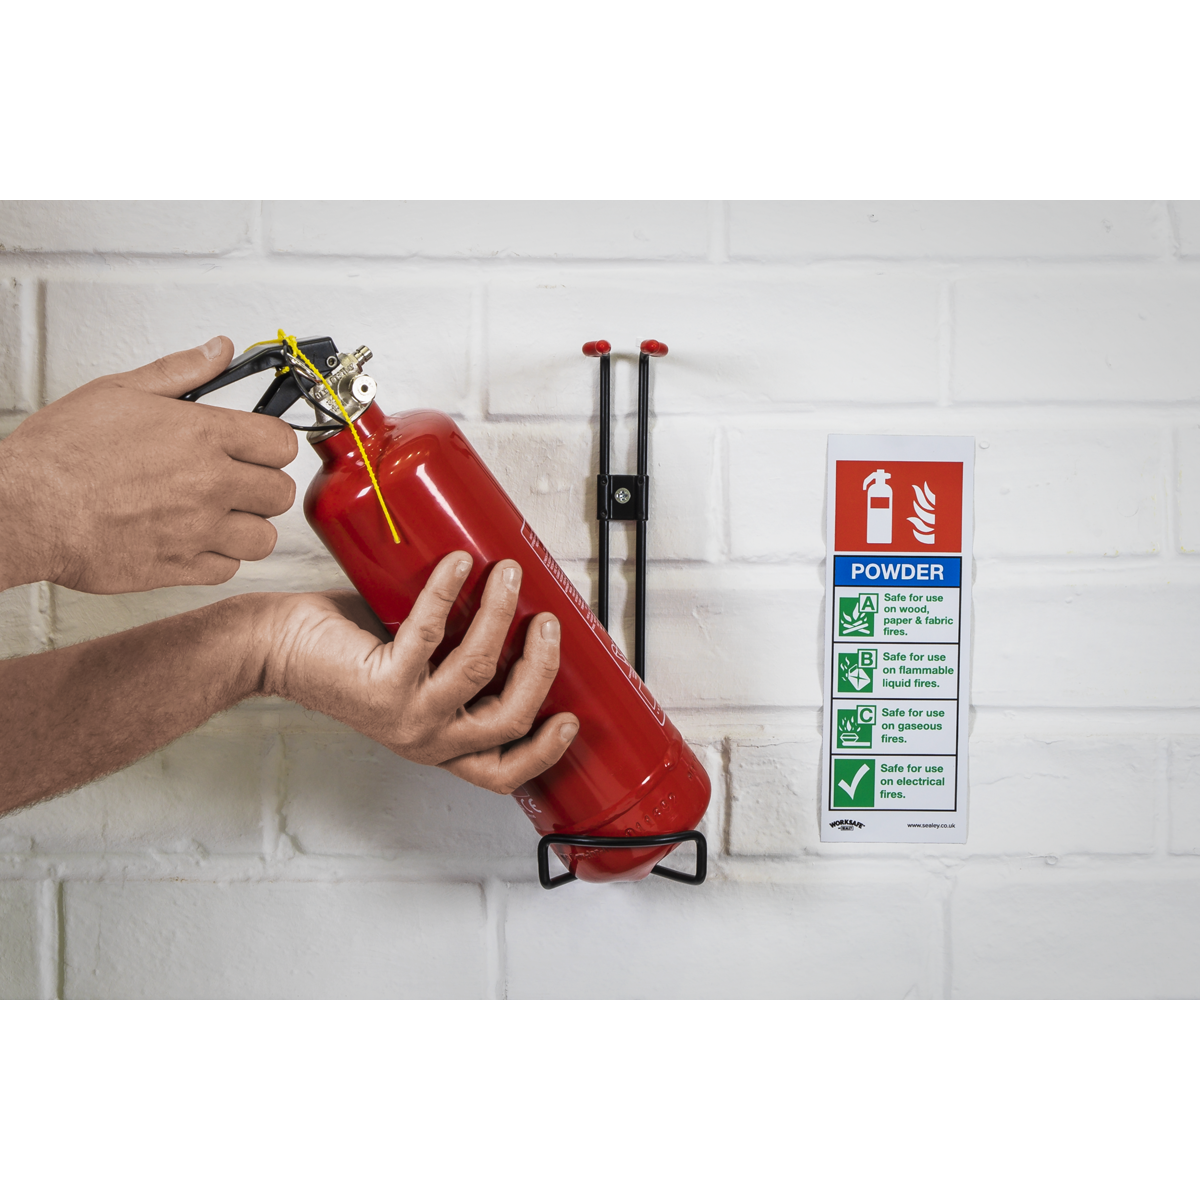 Safe Conditions Safety Sign - Powder Fire Extinguisher - Rigid Plastic